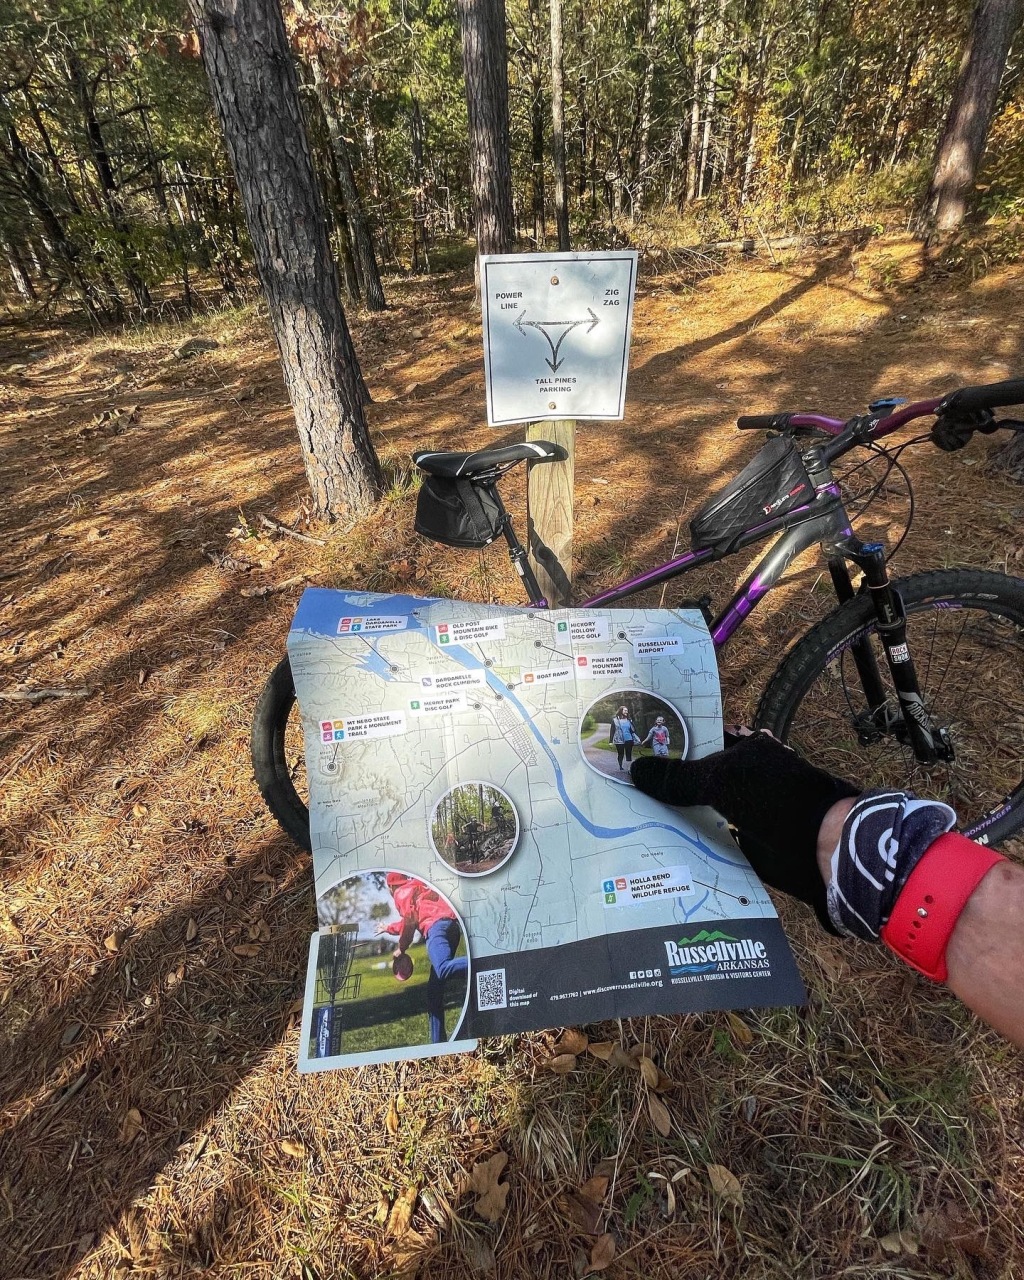 Top 10 Reasons to Ride at Old Post Road Mountain Bike Trails